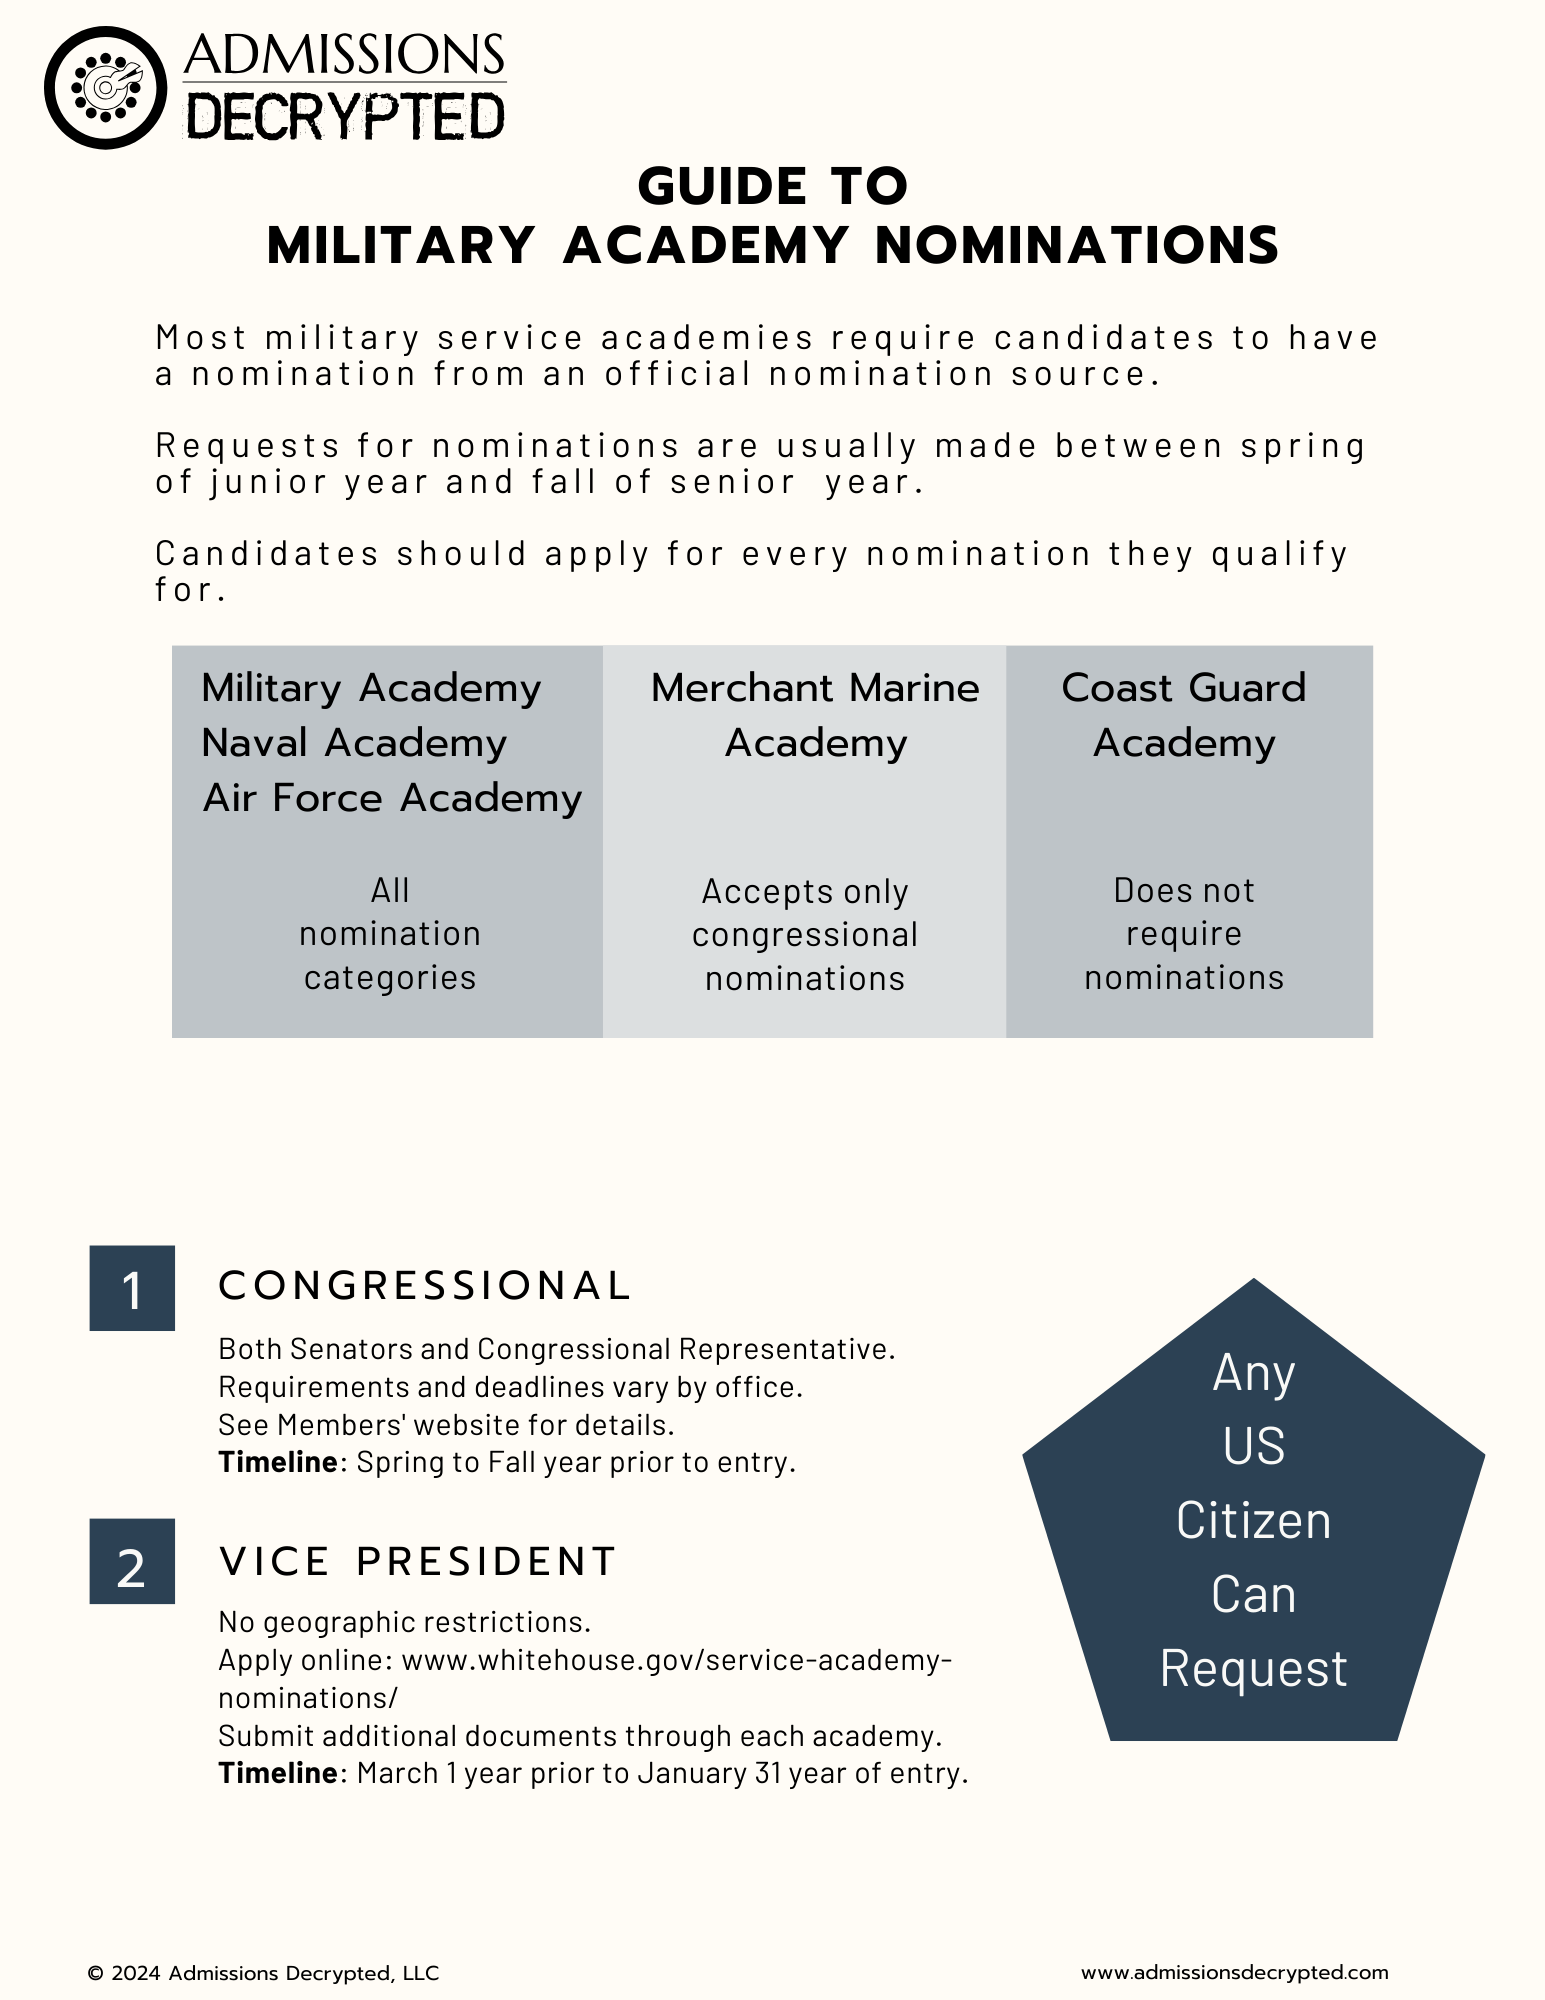 Graphic explaining military academy nomination requirements